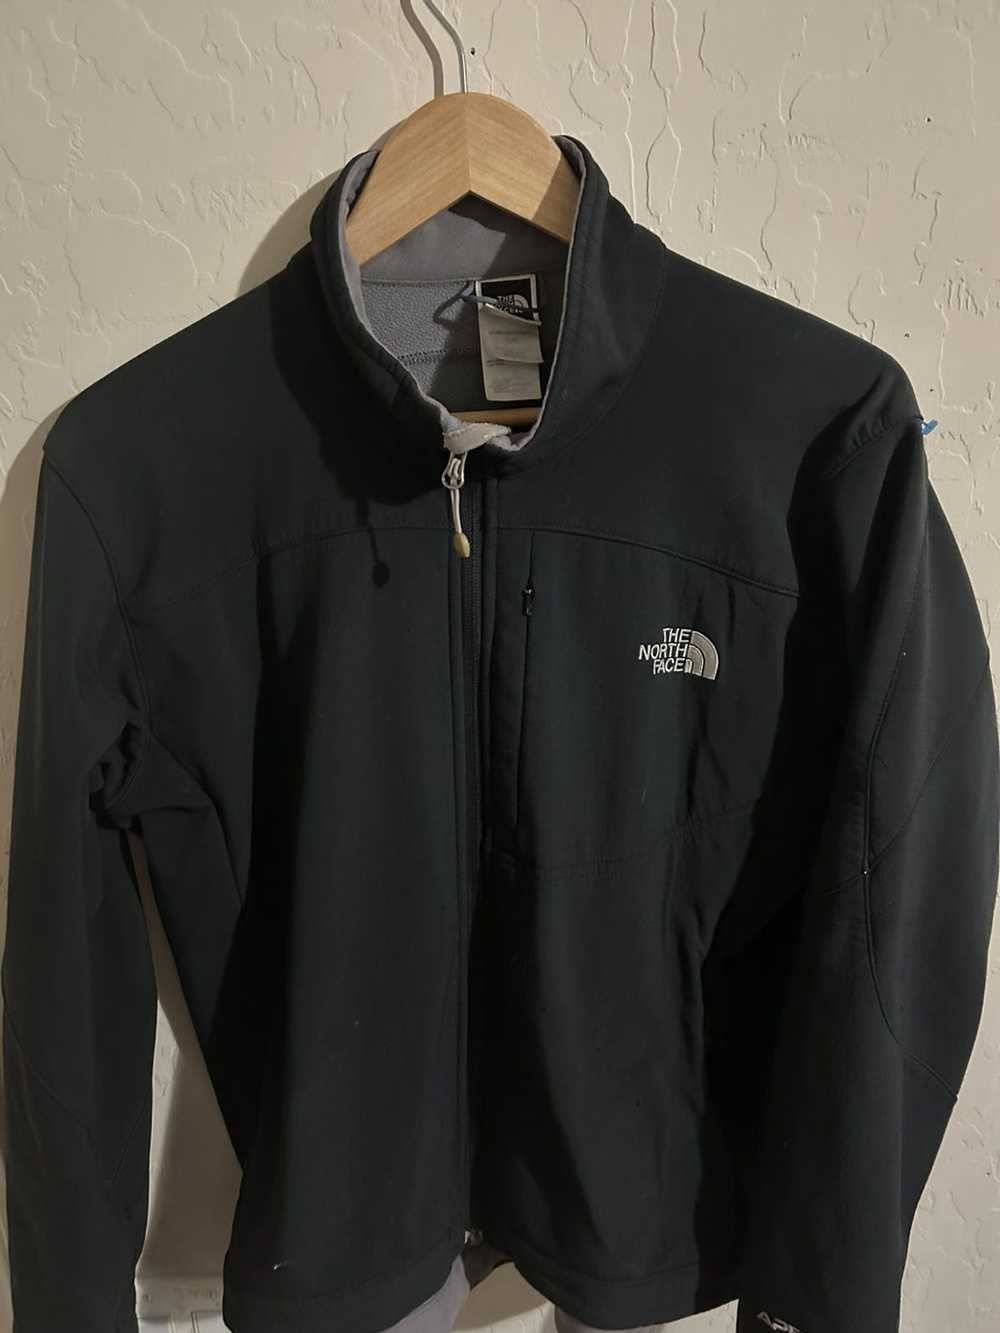 The North Face North Face Apex Jacket - image 4